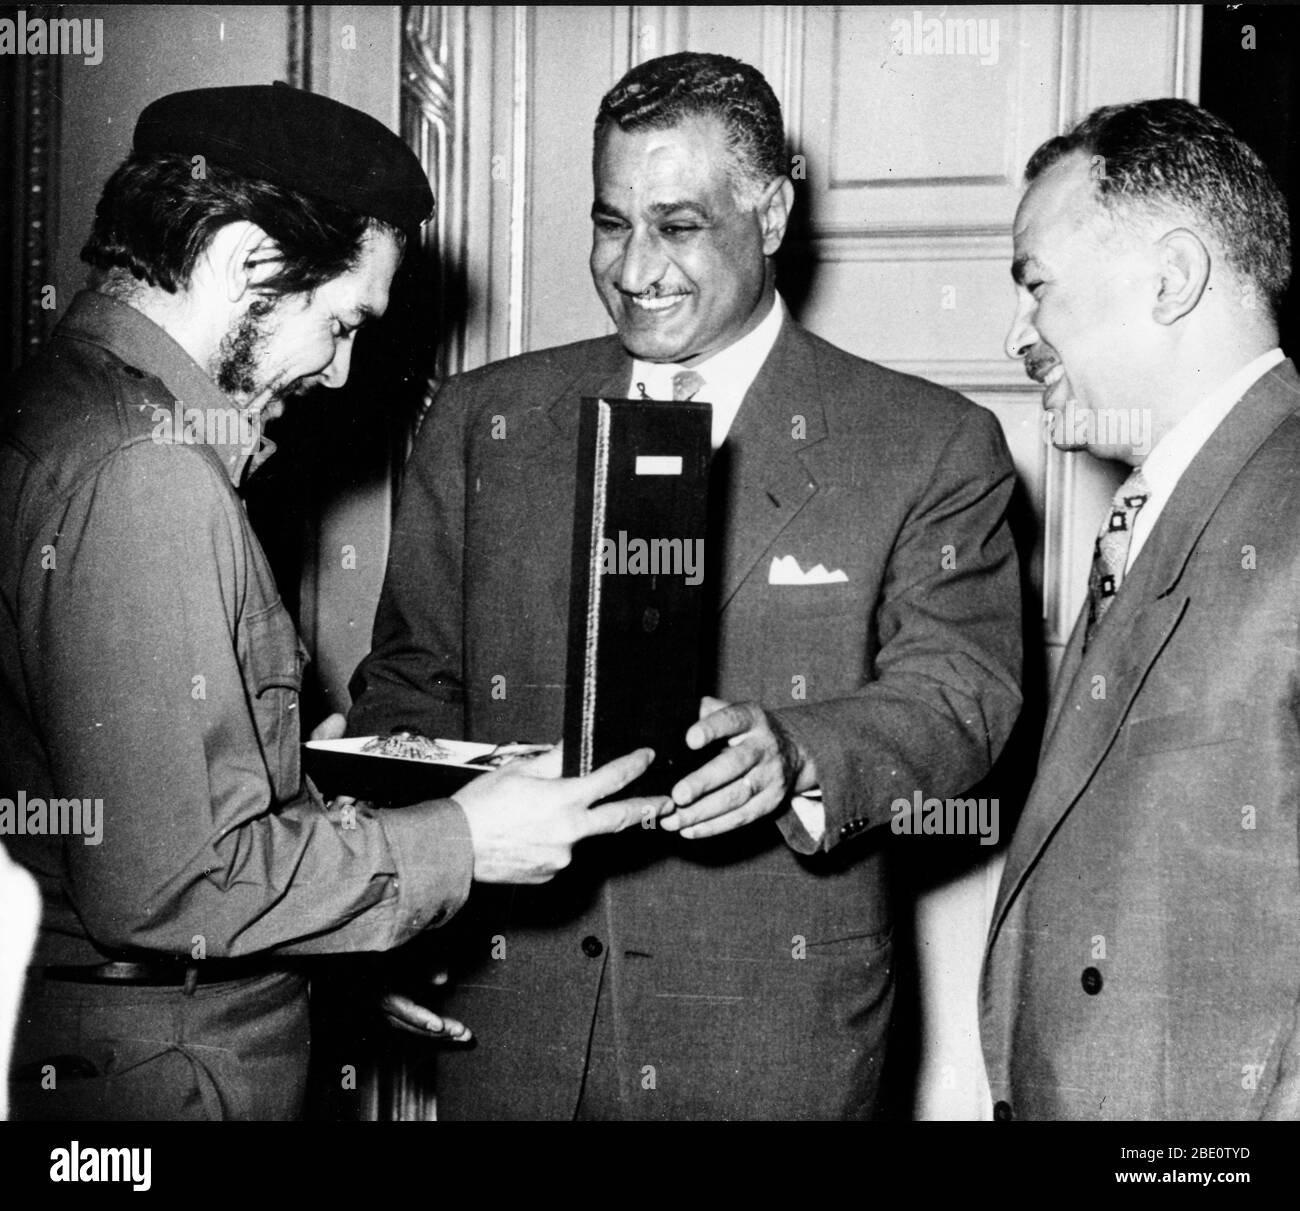 June 22, 1959 - Cairo, Egypt  - Egyptian President GAMAL ABDEL NASSER (at the center), is awarding Commander ERNESTO 'CHE' GUEVARA with the Order of Al Goumbania with another man looking on. Guevara, who received his first official post in Cuba as an Ambassador, was at leading a Cuban Civilian delegation to Egypt. Nasser, leader of the non-aligned countries, was the first head of state to welcome an Ambassador from the Castro regime.(Credit Image: © Keystone Press Agency/Keystone USA via ZUMAPRESS.com) Stock Photo